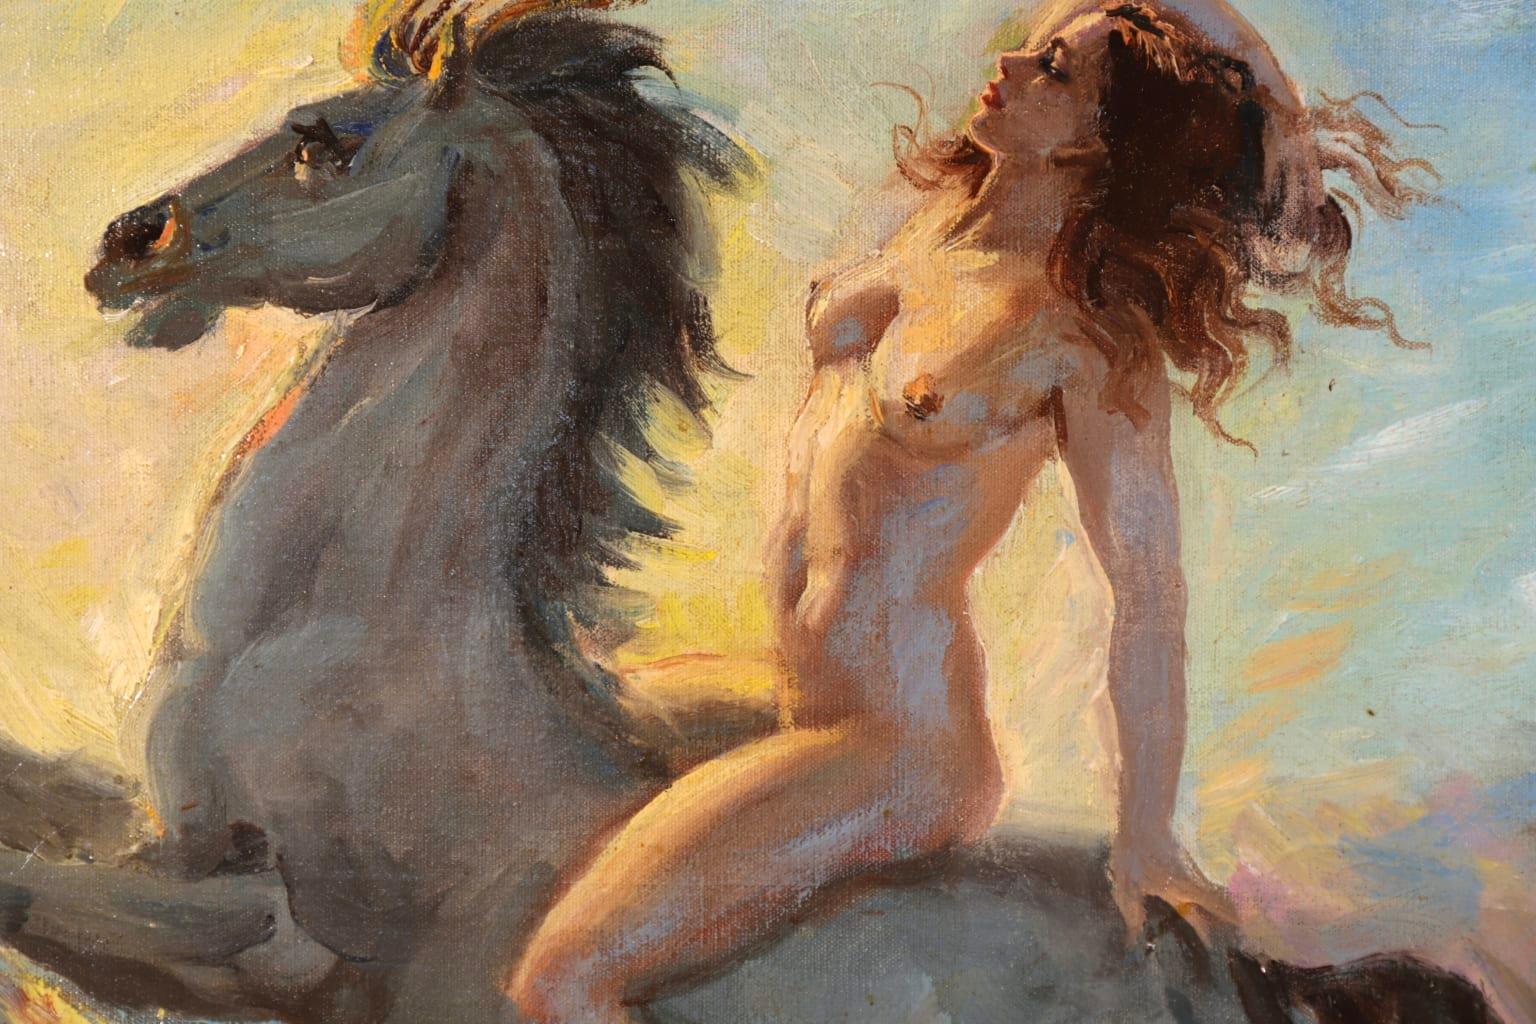 A stunning oil on board by British symbolist painter George Owen Wynne Apperley depicting a beautiful nude woman on horseback as the horse gallops through the waves of the sea with the sun setting behind them.

Signature:
Signed lower left &